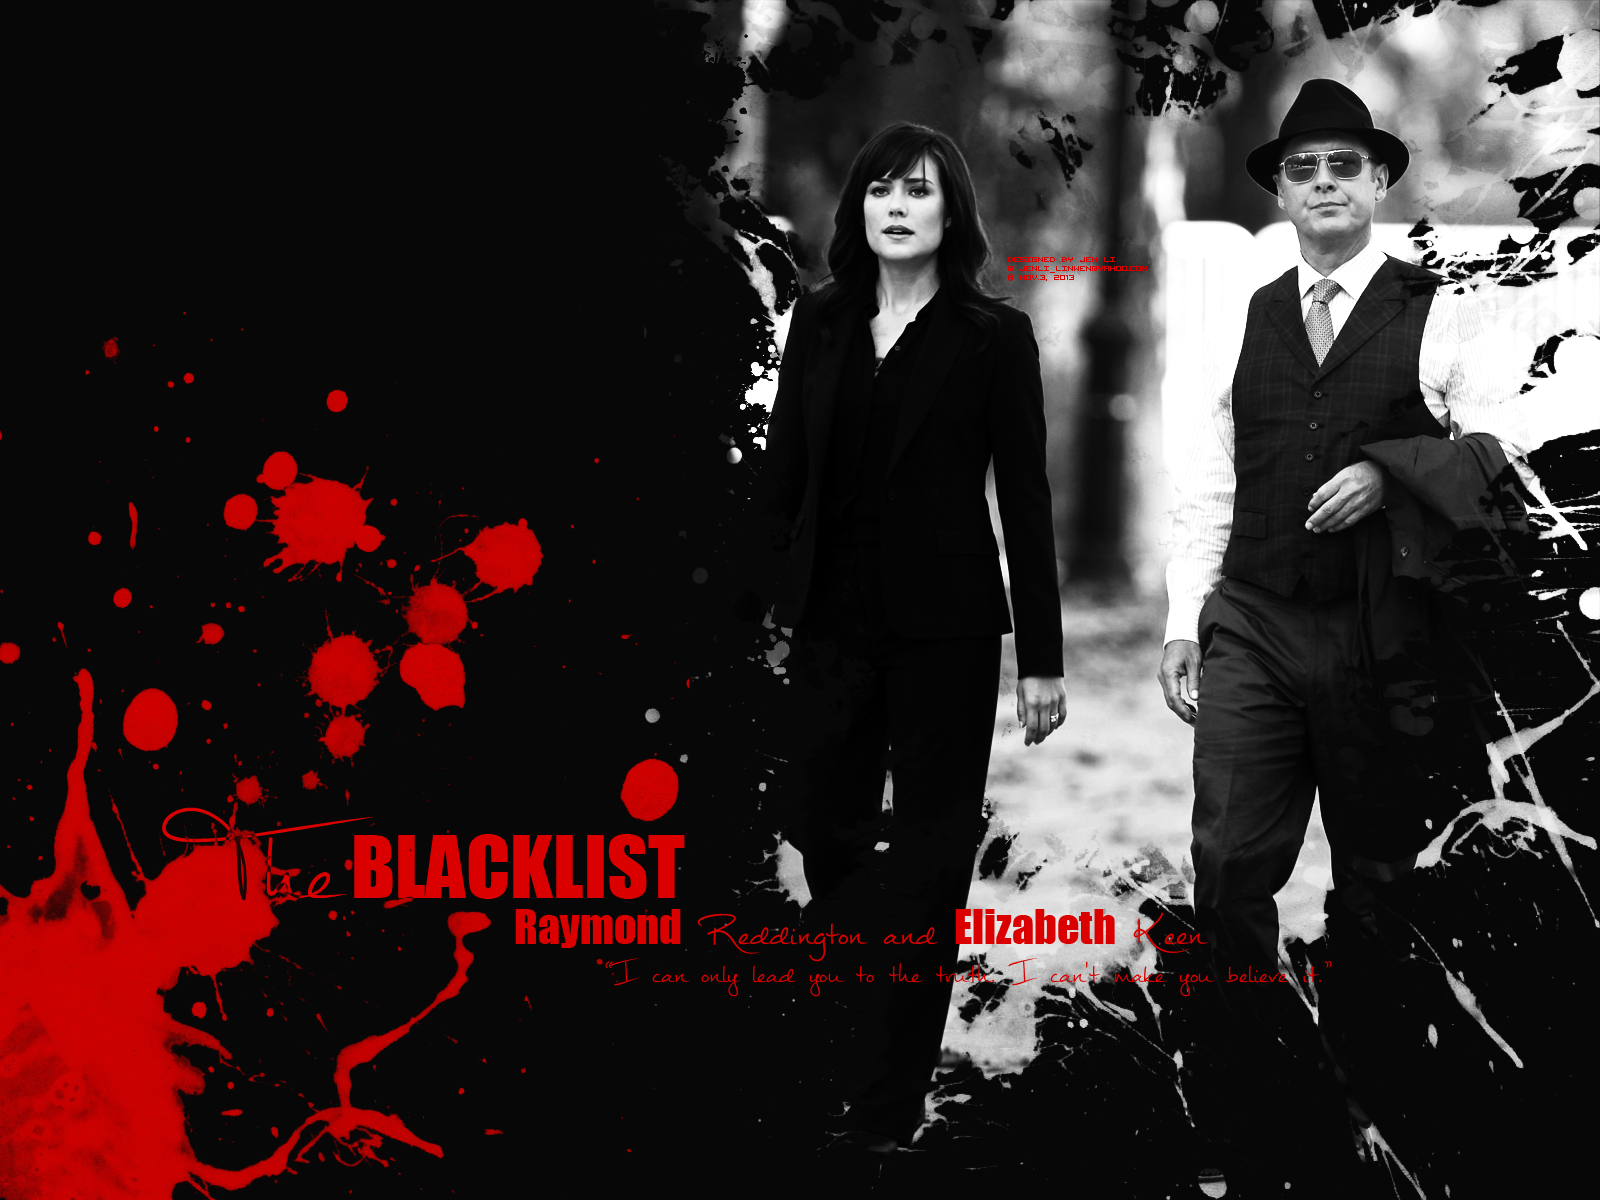 Red-and-Liz-the-blacklist-36004897-1600-1200.png